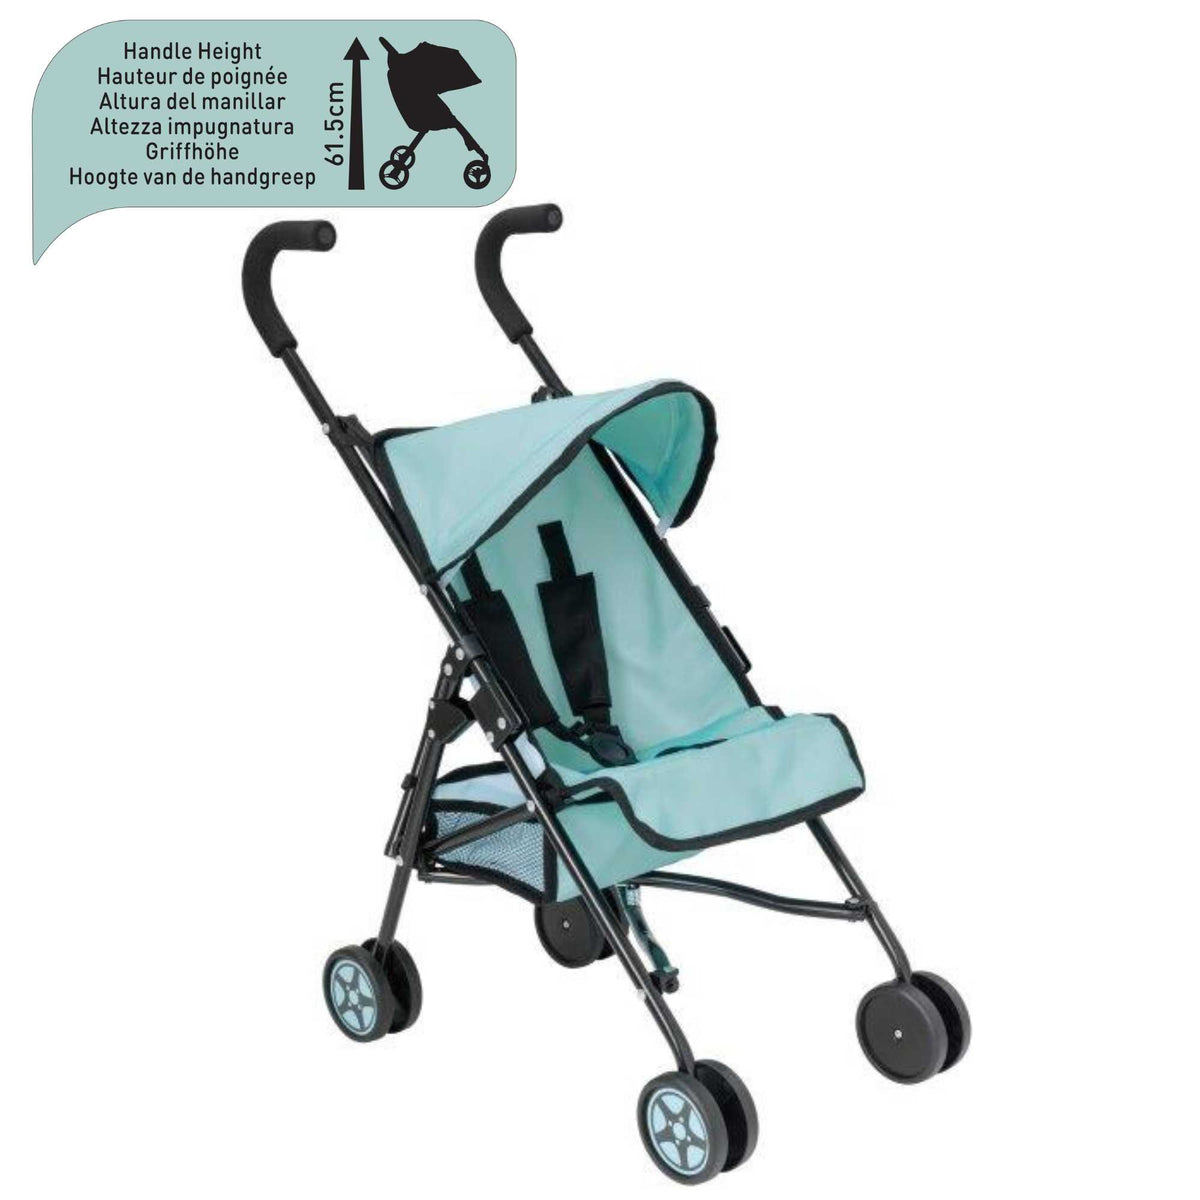 Chicco Echo Dolls Stroller - Lightweight, Durable, and Stylish Toy Stroller for Kids&#39; Playtime